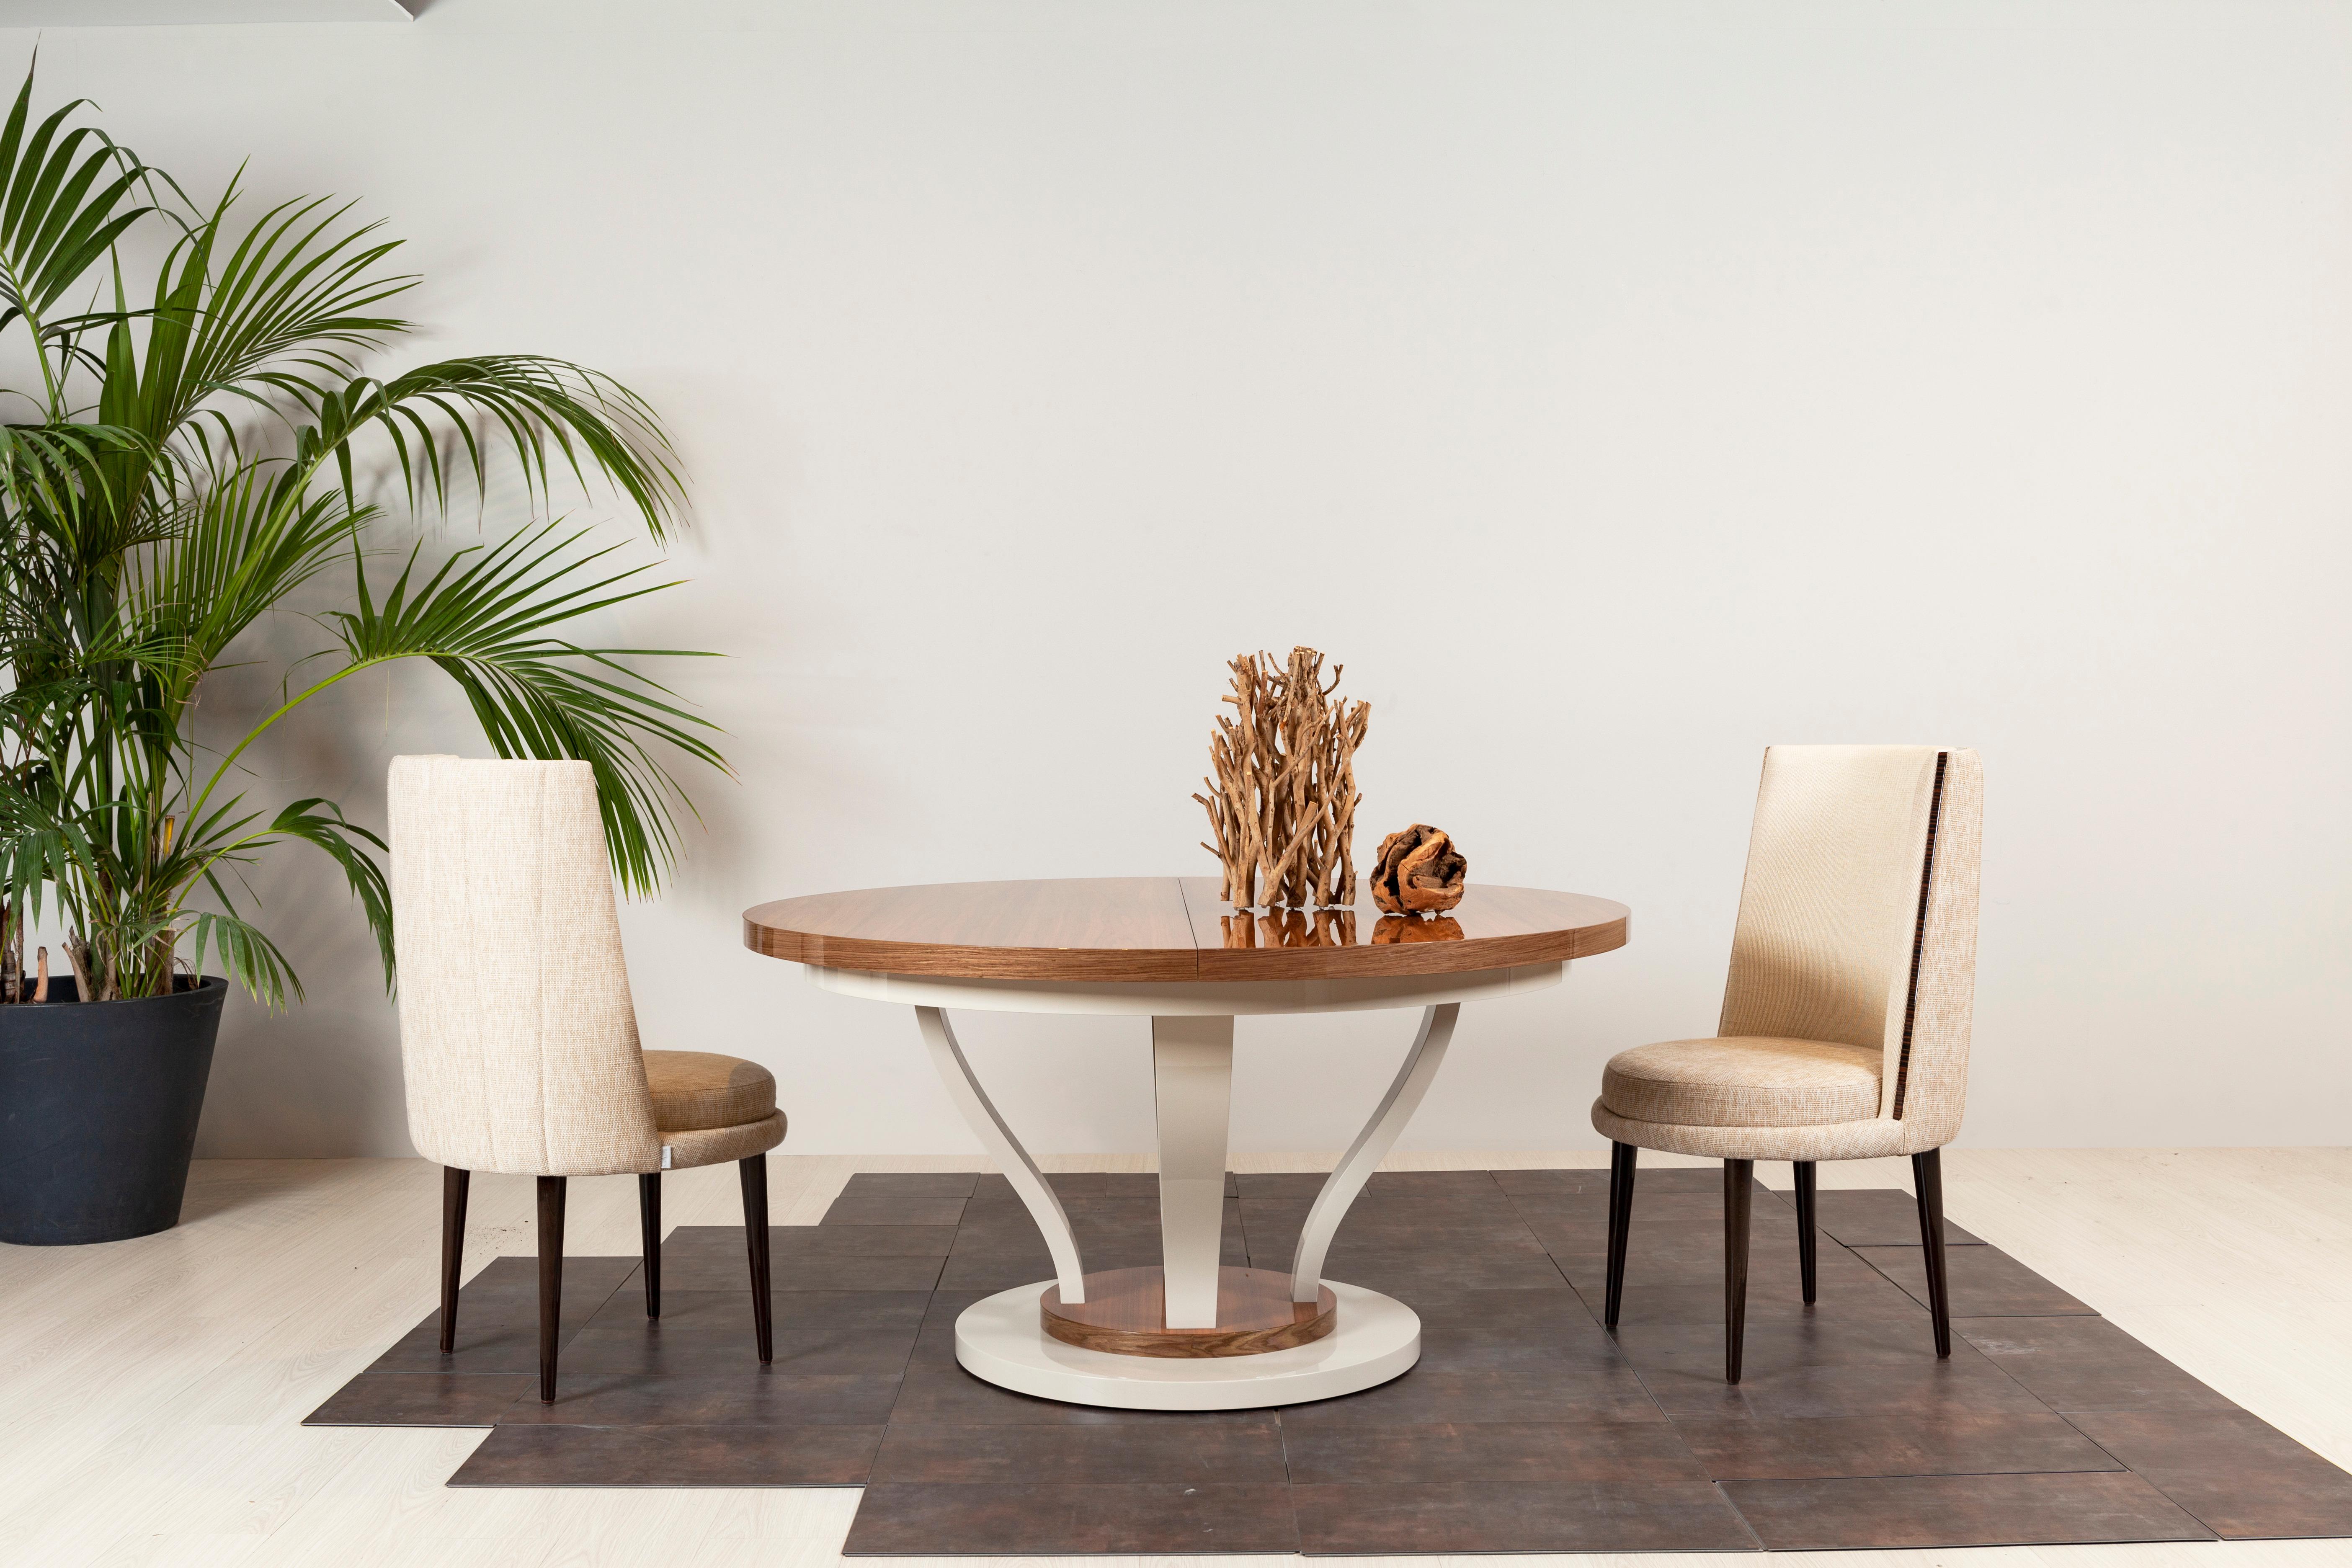 Antuérpia Extendable Dining Table 4/6-Seats, Modern Collection, Handcrafted in Portugal - Europe by GF Modern.

Antuérpia dining table represents the dawn of a new modern era. The extendable table top in natural Walnut complements the beige legs,